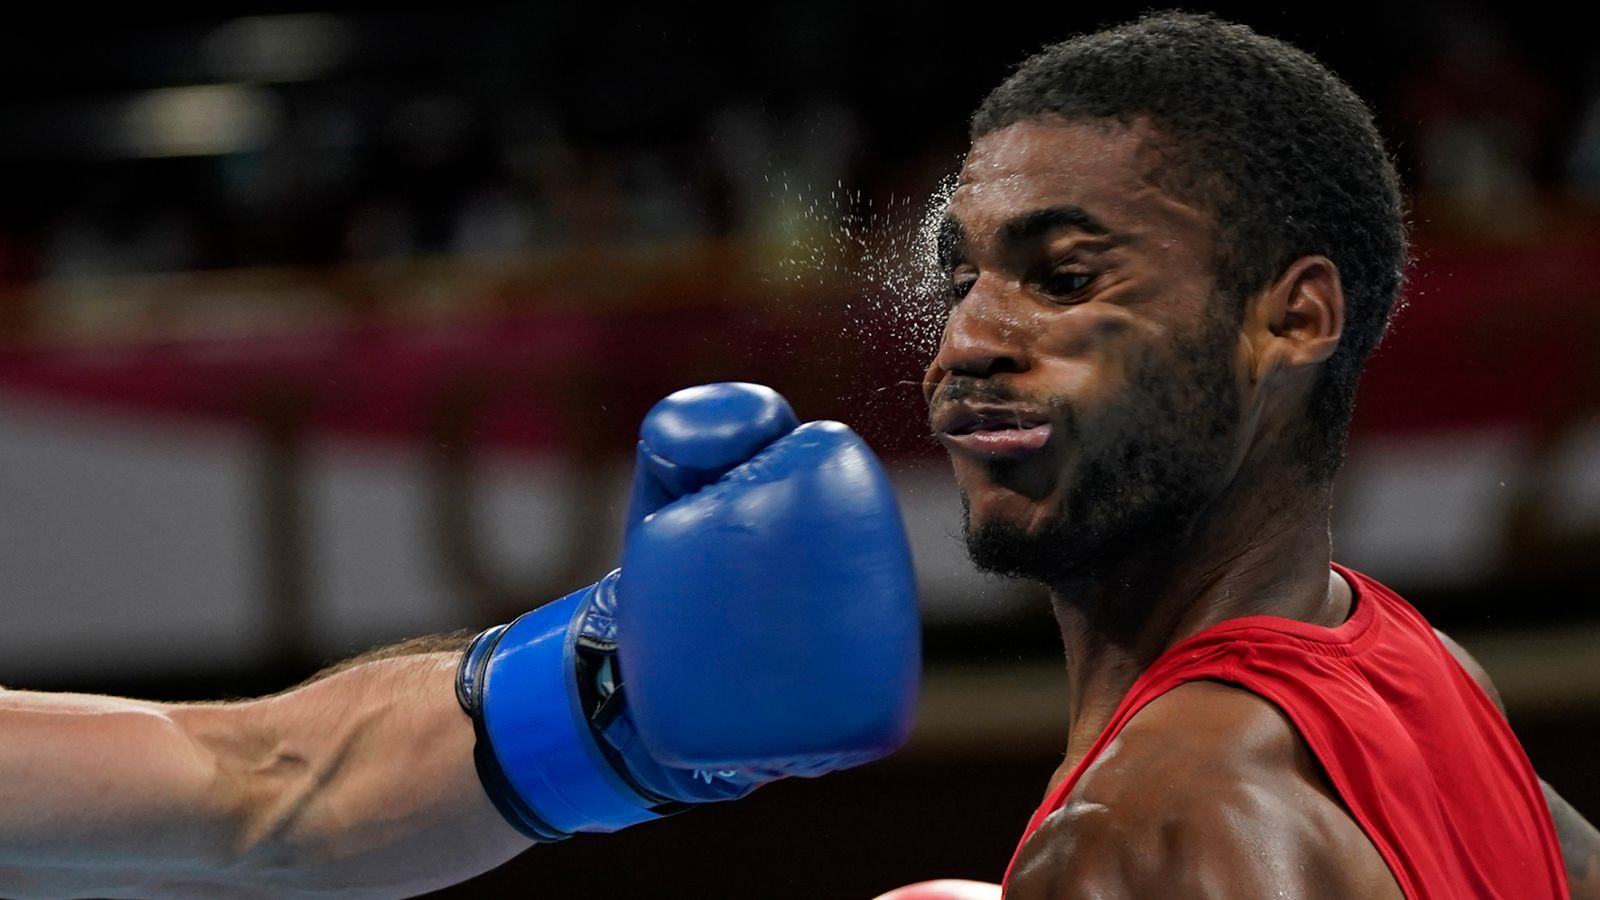 Olympic boxing at maximum risk: 'The clock is ticking' | 'IBA doesn't get it,' says USA Boxing